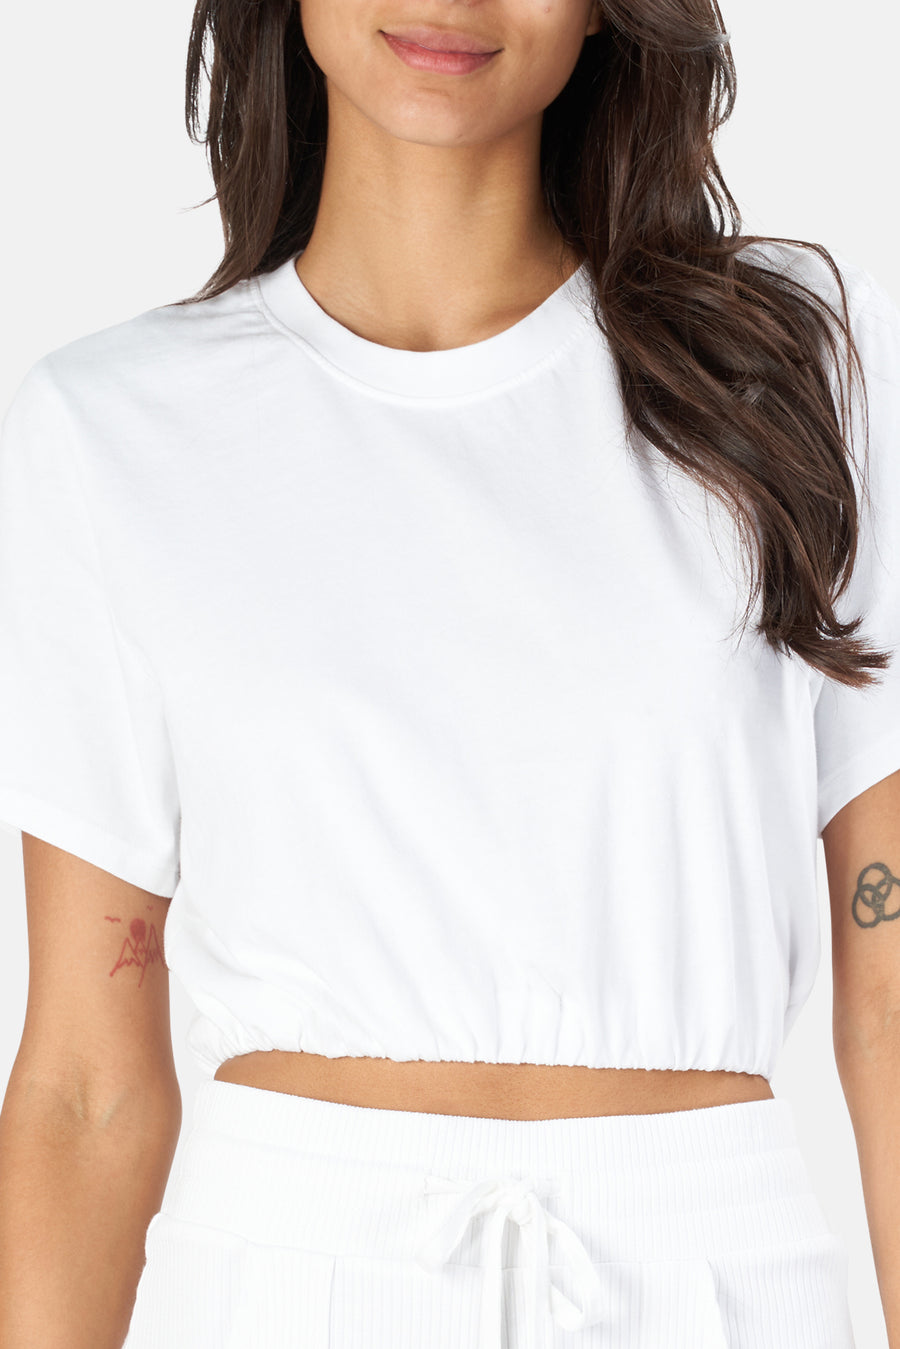 Substance Jersey Bubble Cropped Tee White - blueandcream